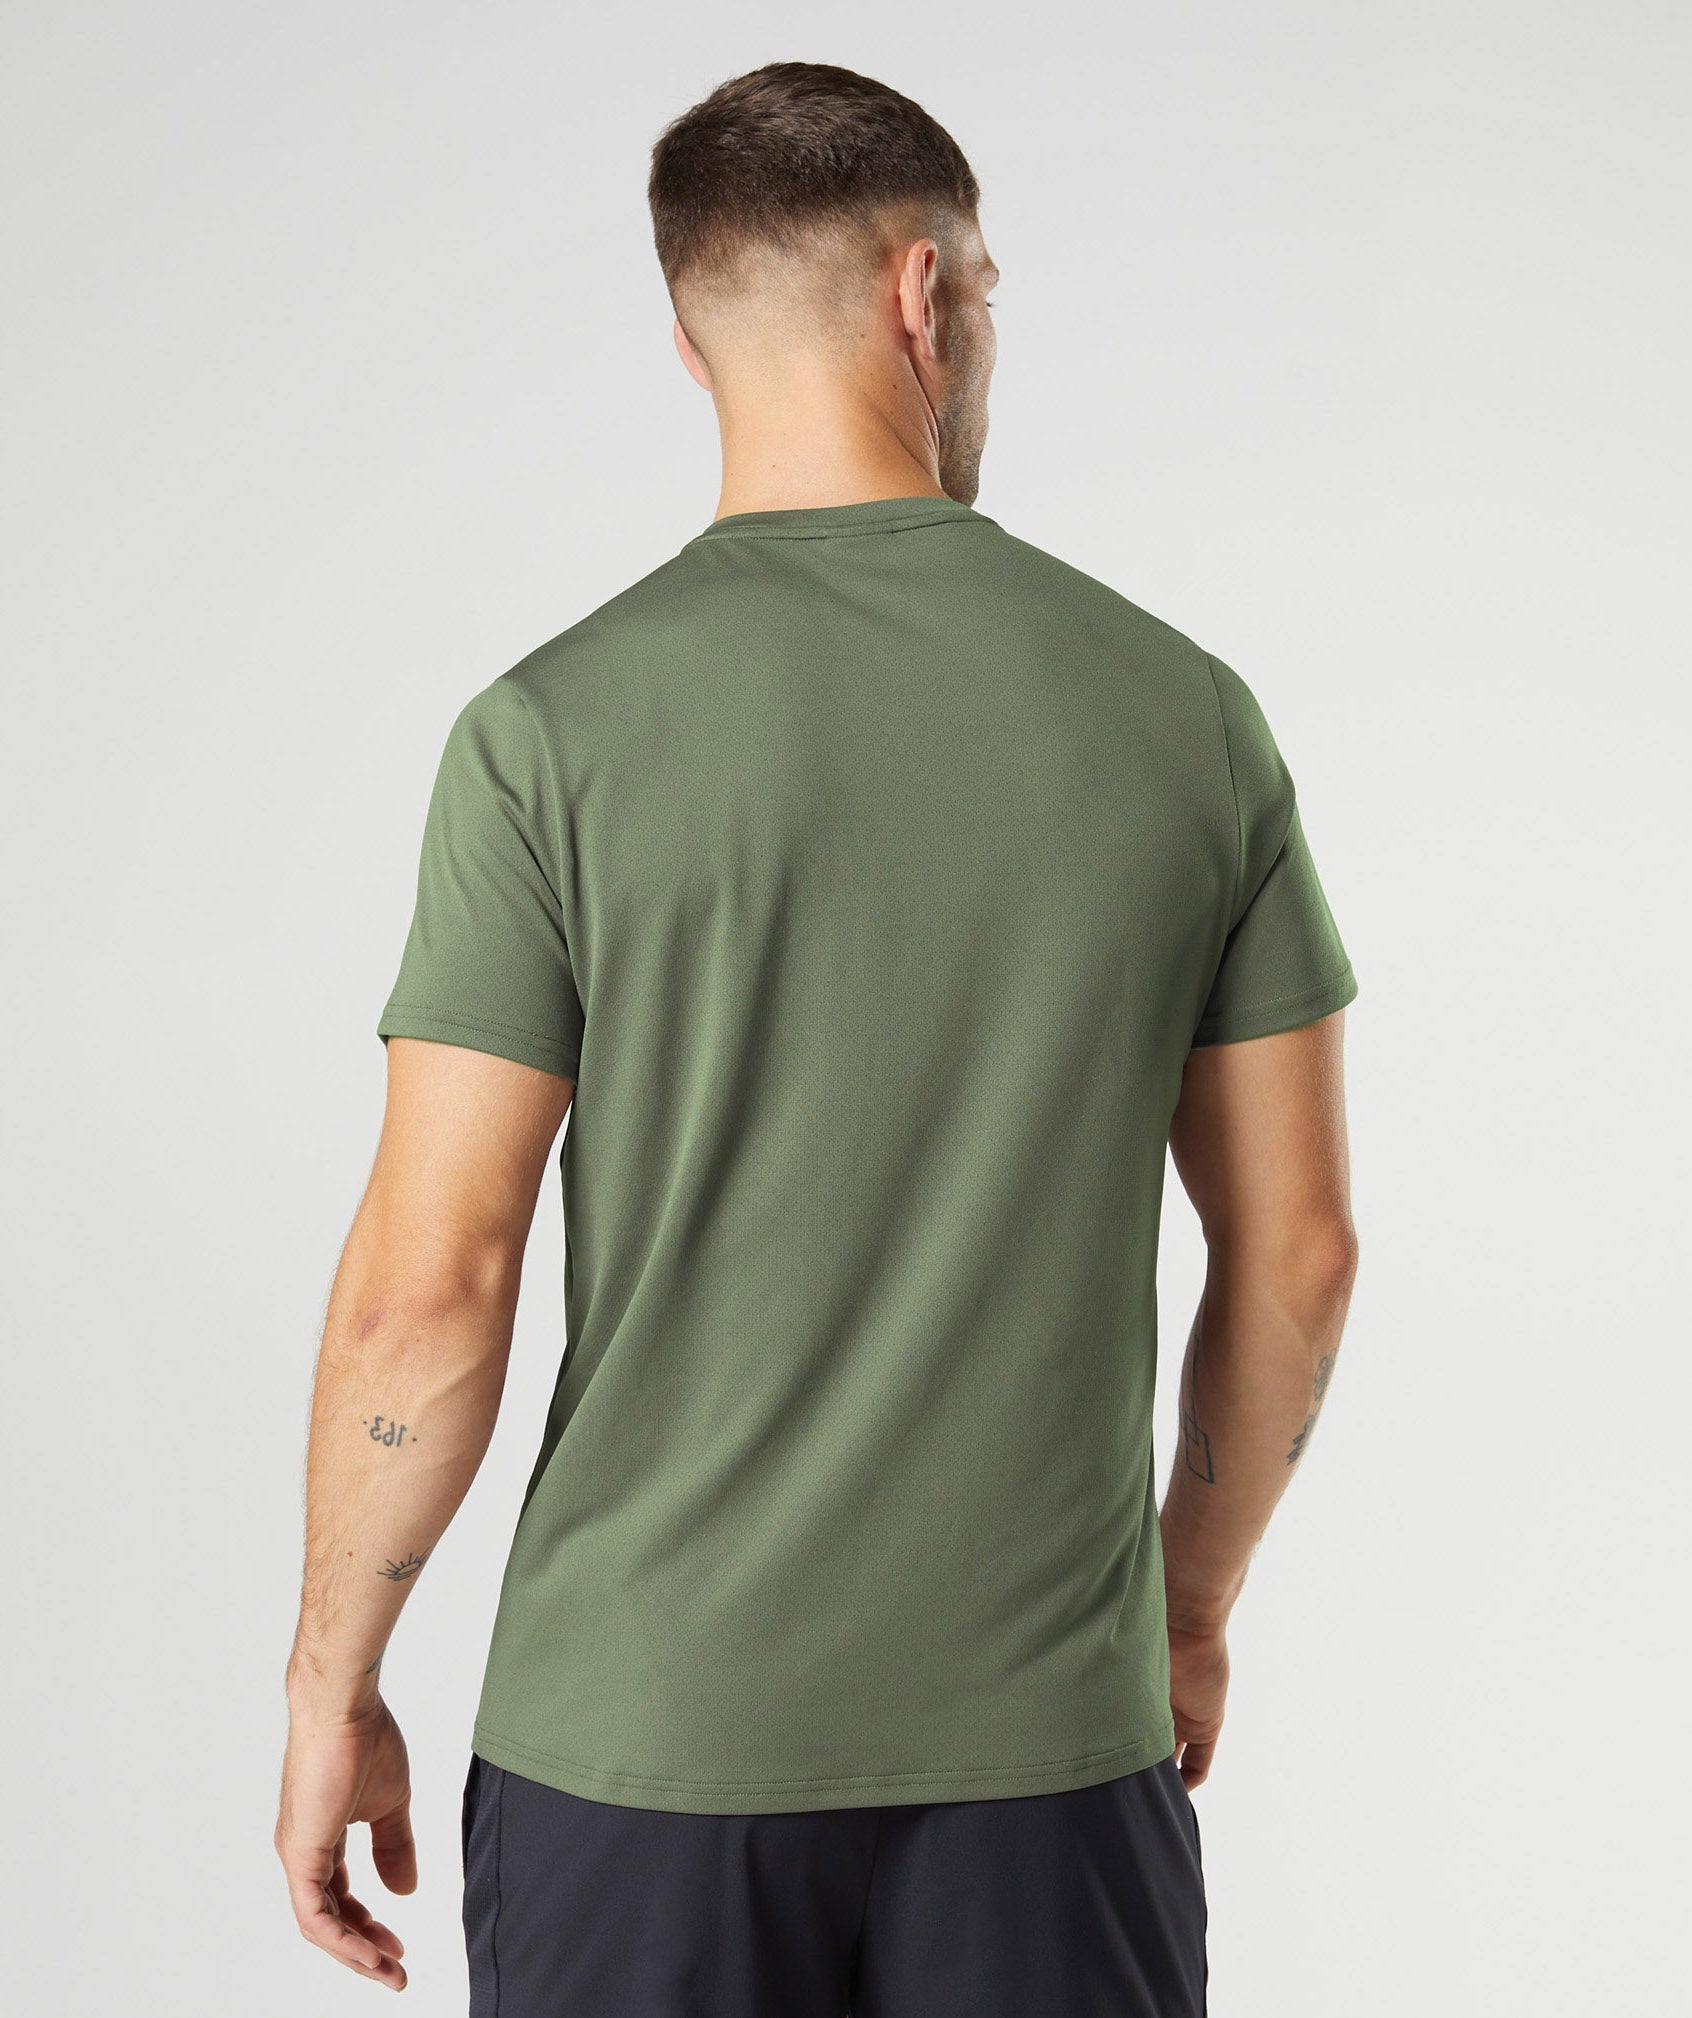 Arrival T-Shirt in Core Olive - view 2